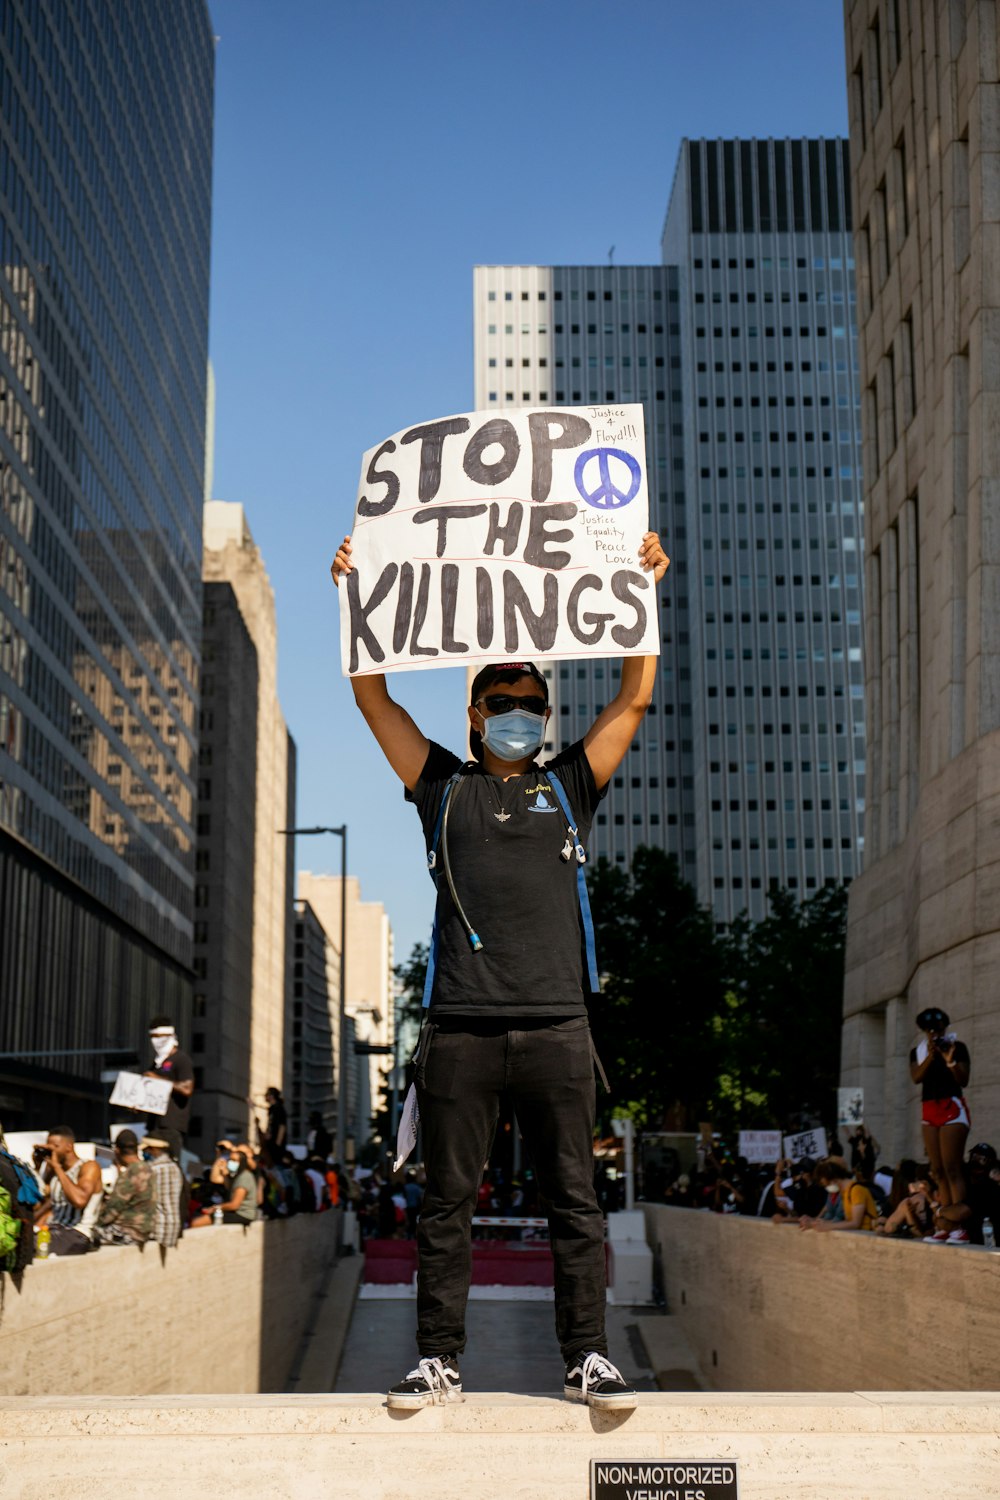 a man holding a sign that says stop the killings